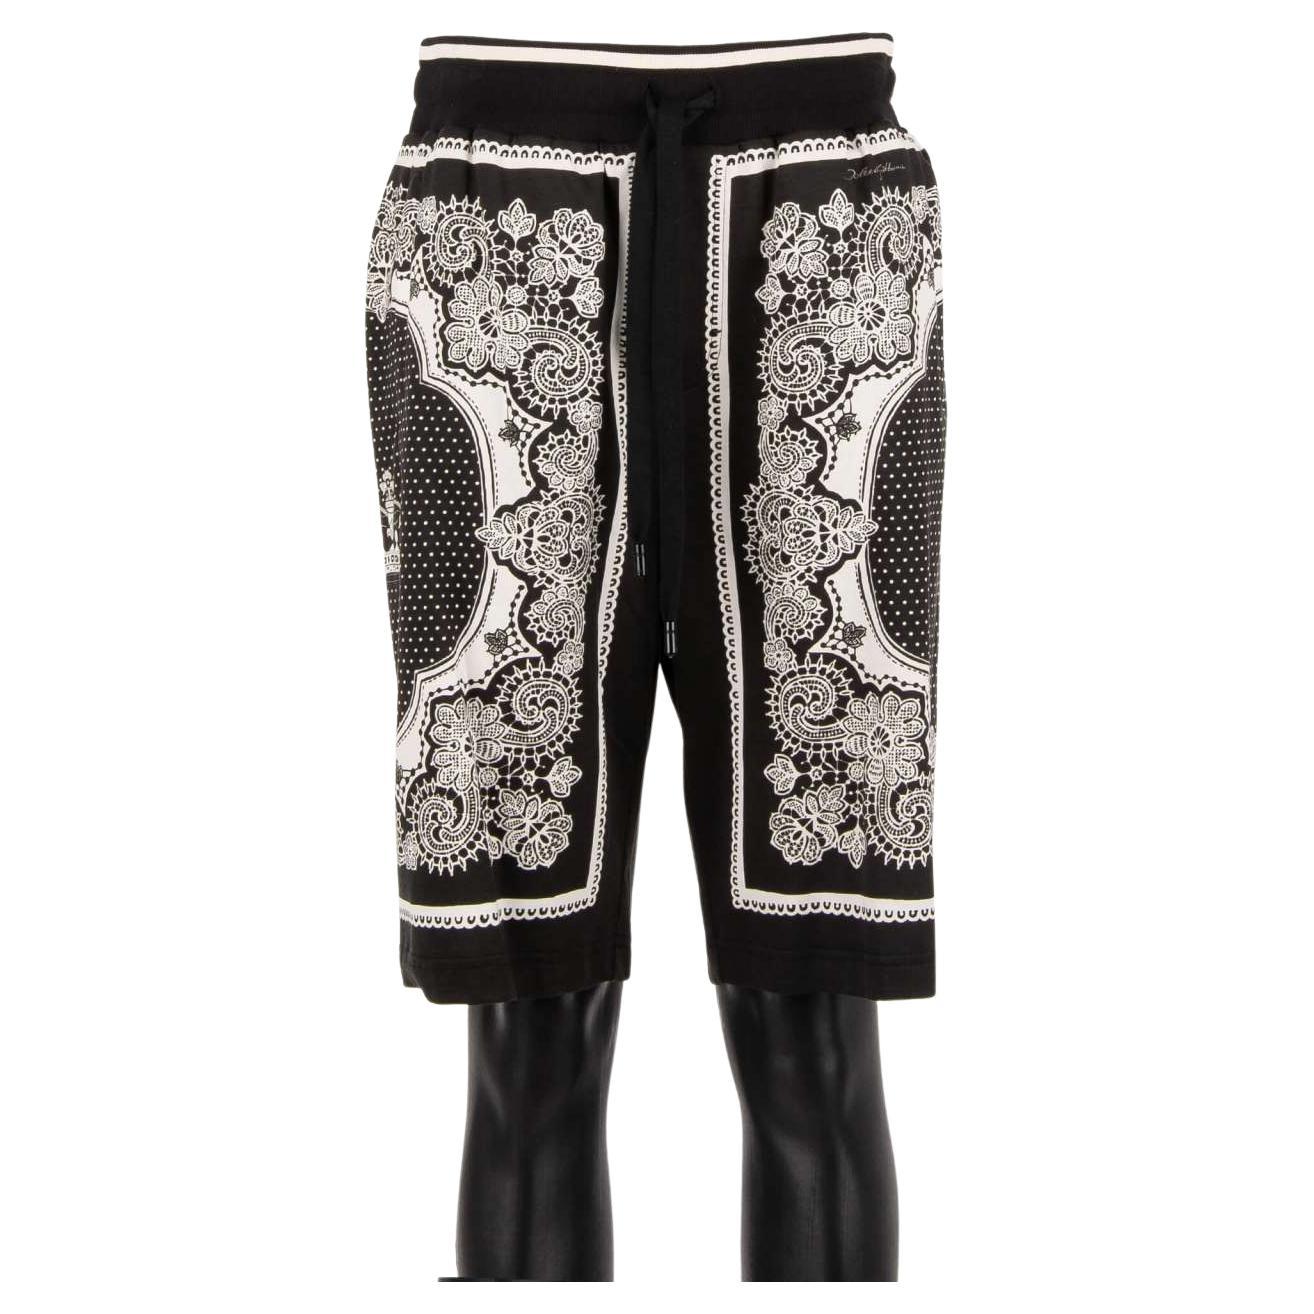 D&G - Cotton Sweatshorts with Bandana Crown Print and Pockets Black White 48 M For Sale